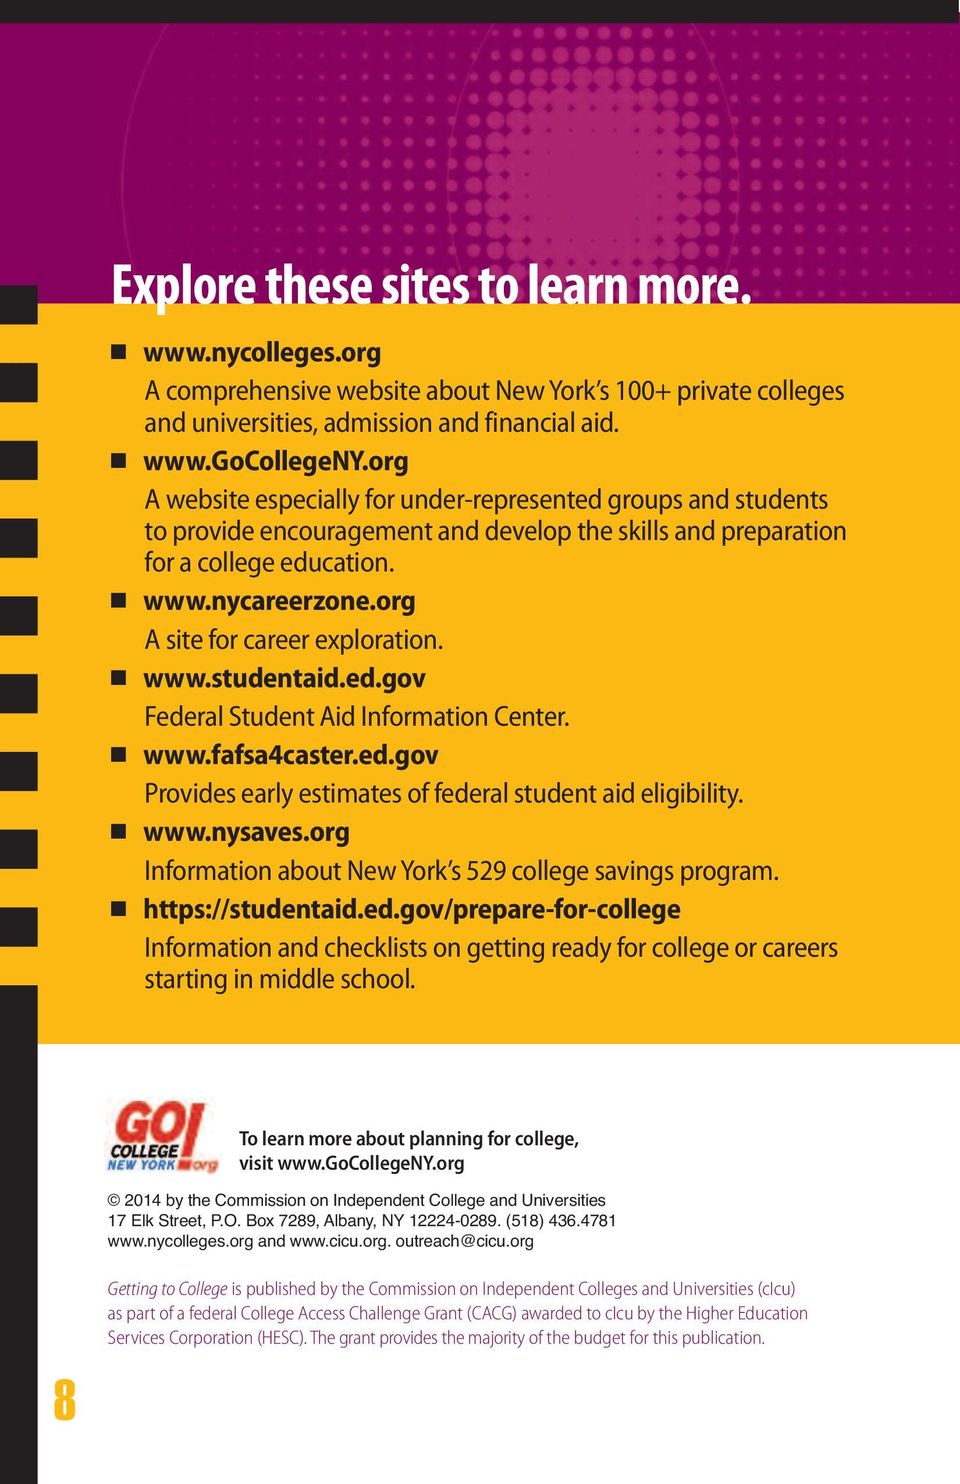 org A site for career exploration. www.studentaid.ed.gov Federal Student Aid Information Center. www.fafsa4caster.ed.gov Provides early estimates of federal student aid eligibility. www.nysaves.